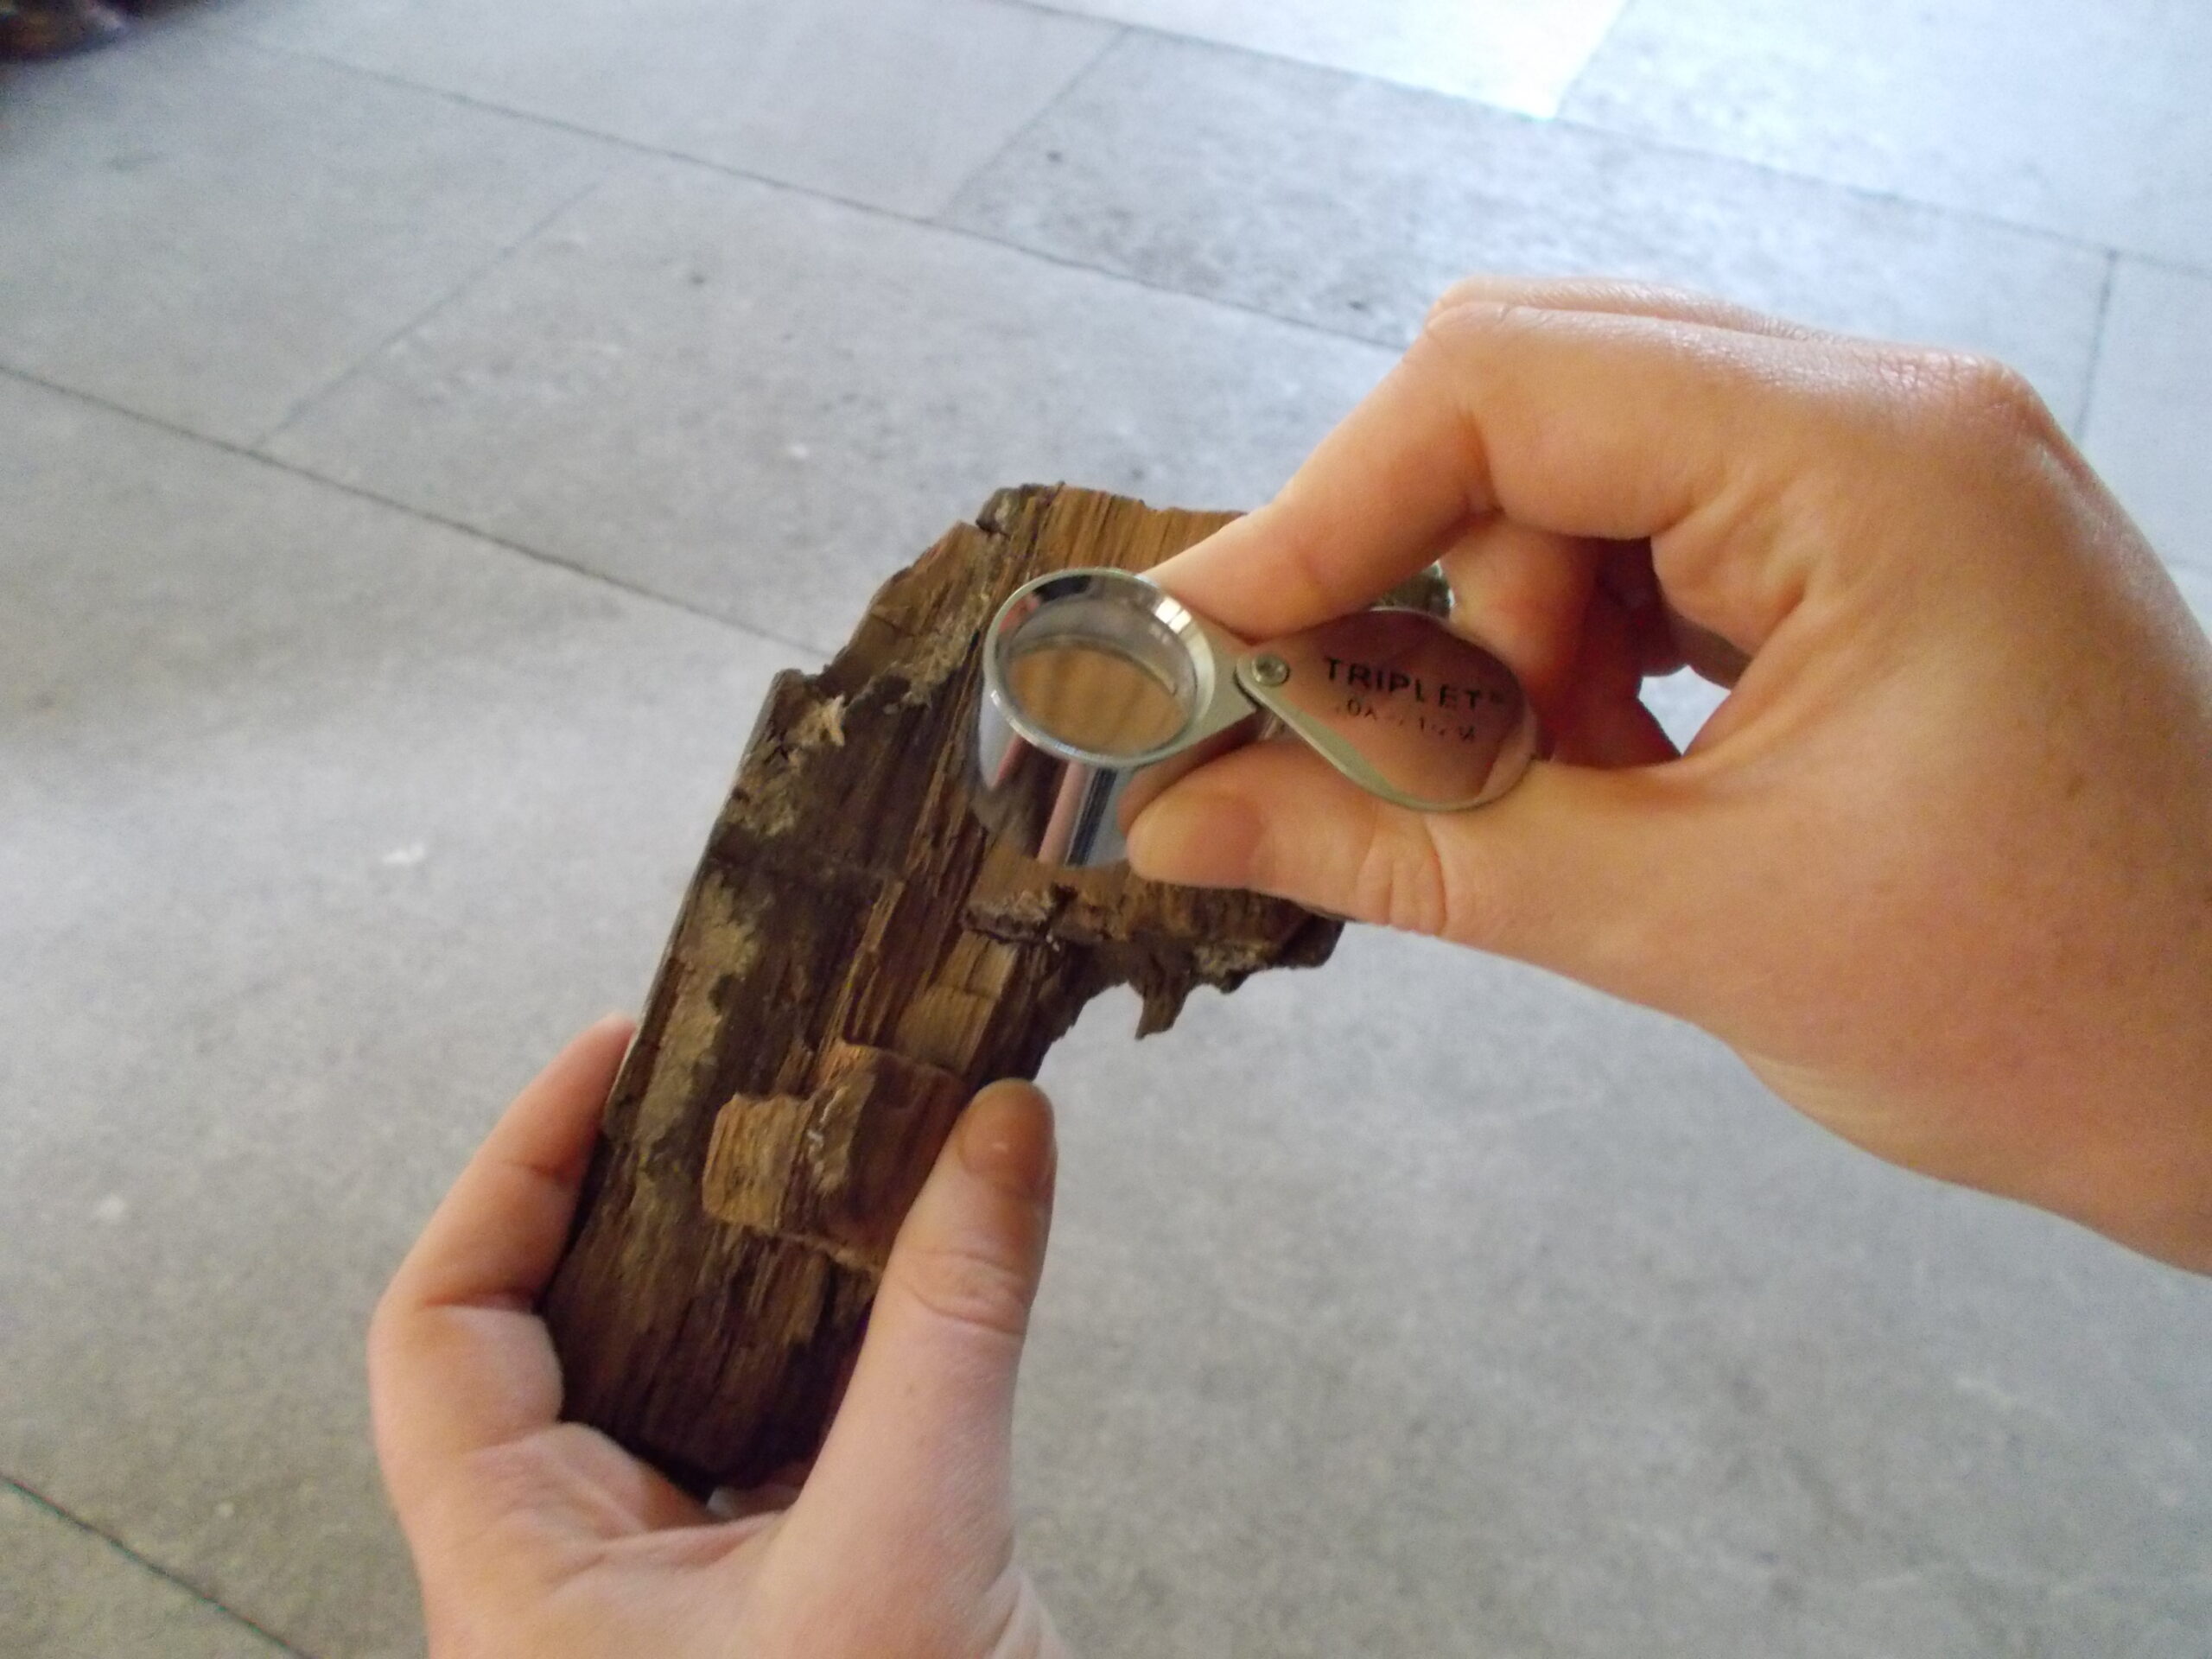 analysing timber under magnifying glass